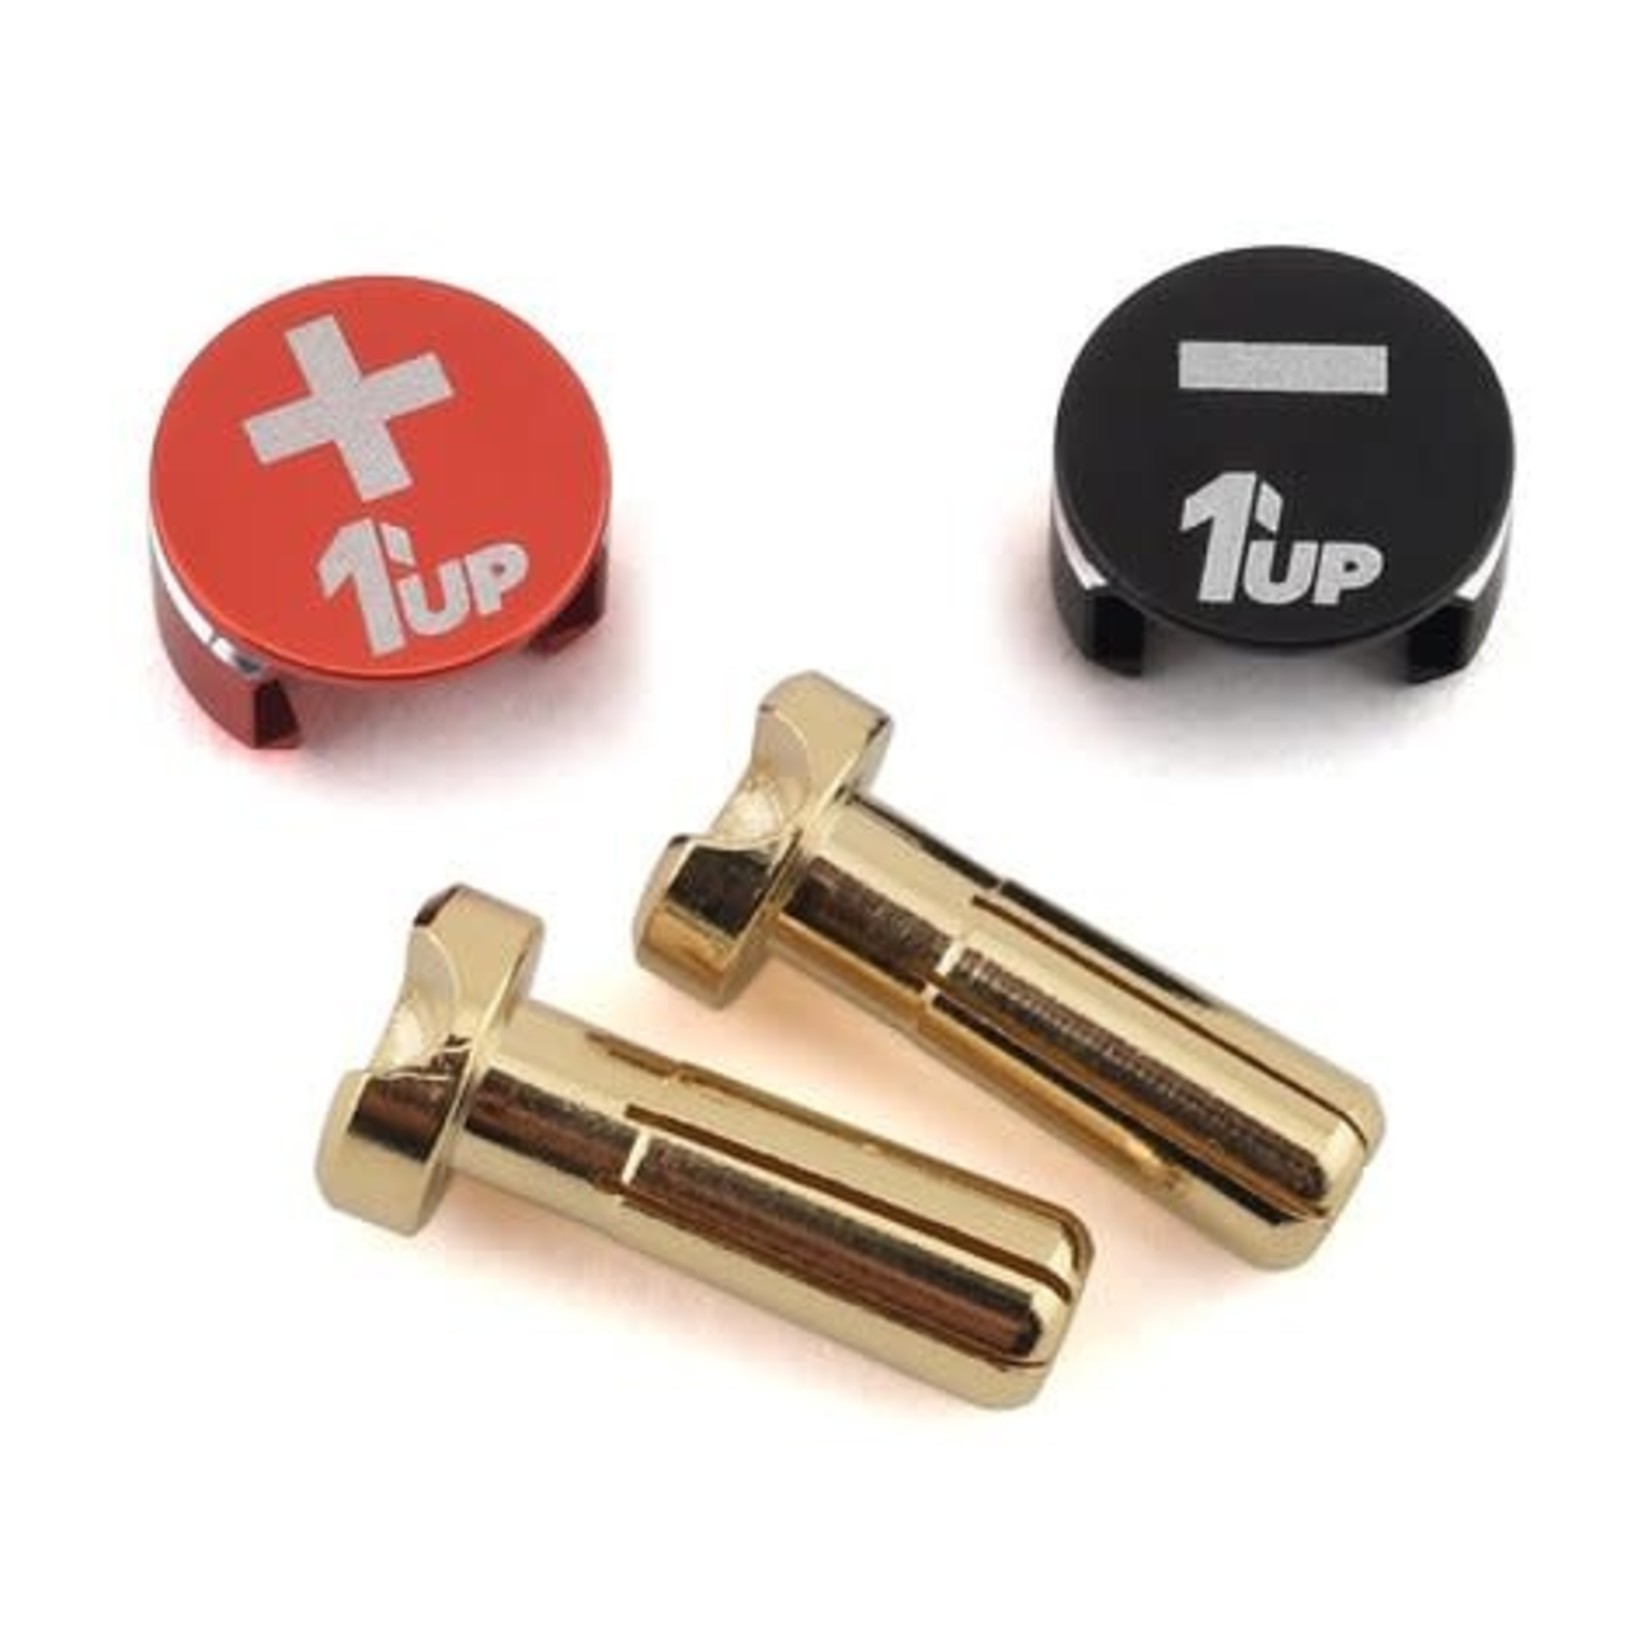 1UP Racing 1UP Racing LowPro Bullet Plug Grips w/4mm Bullets (Black/Red) #190431